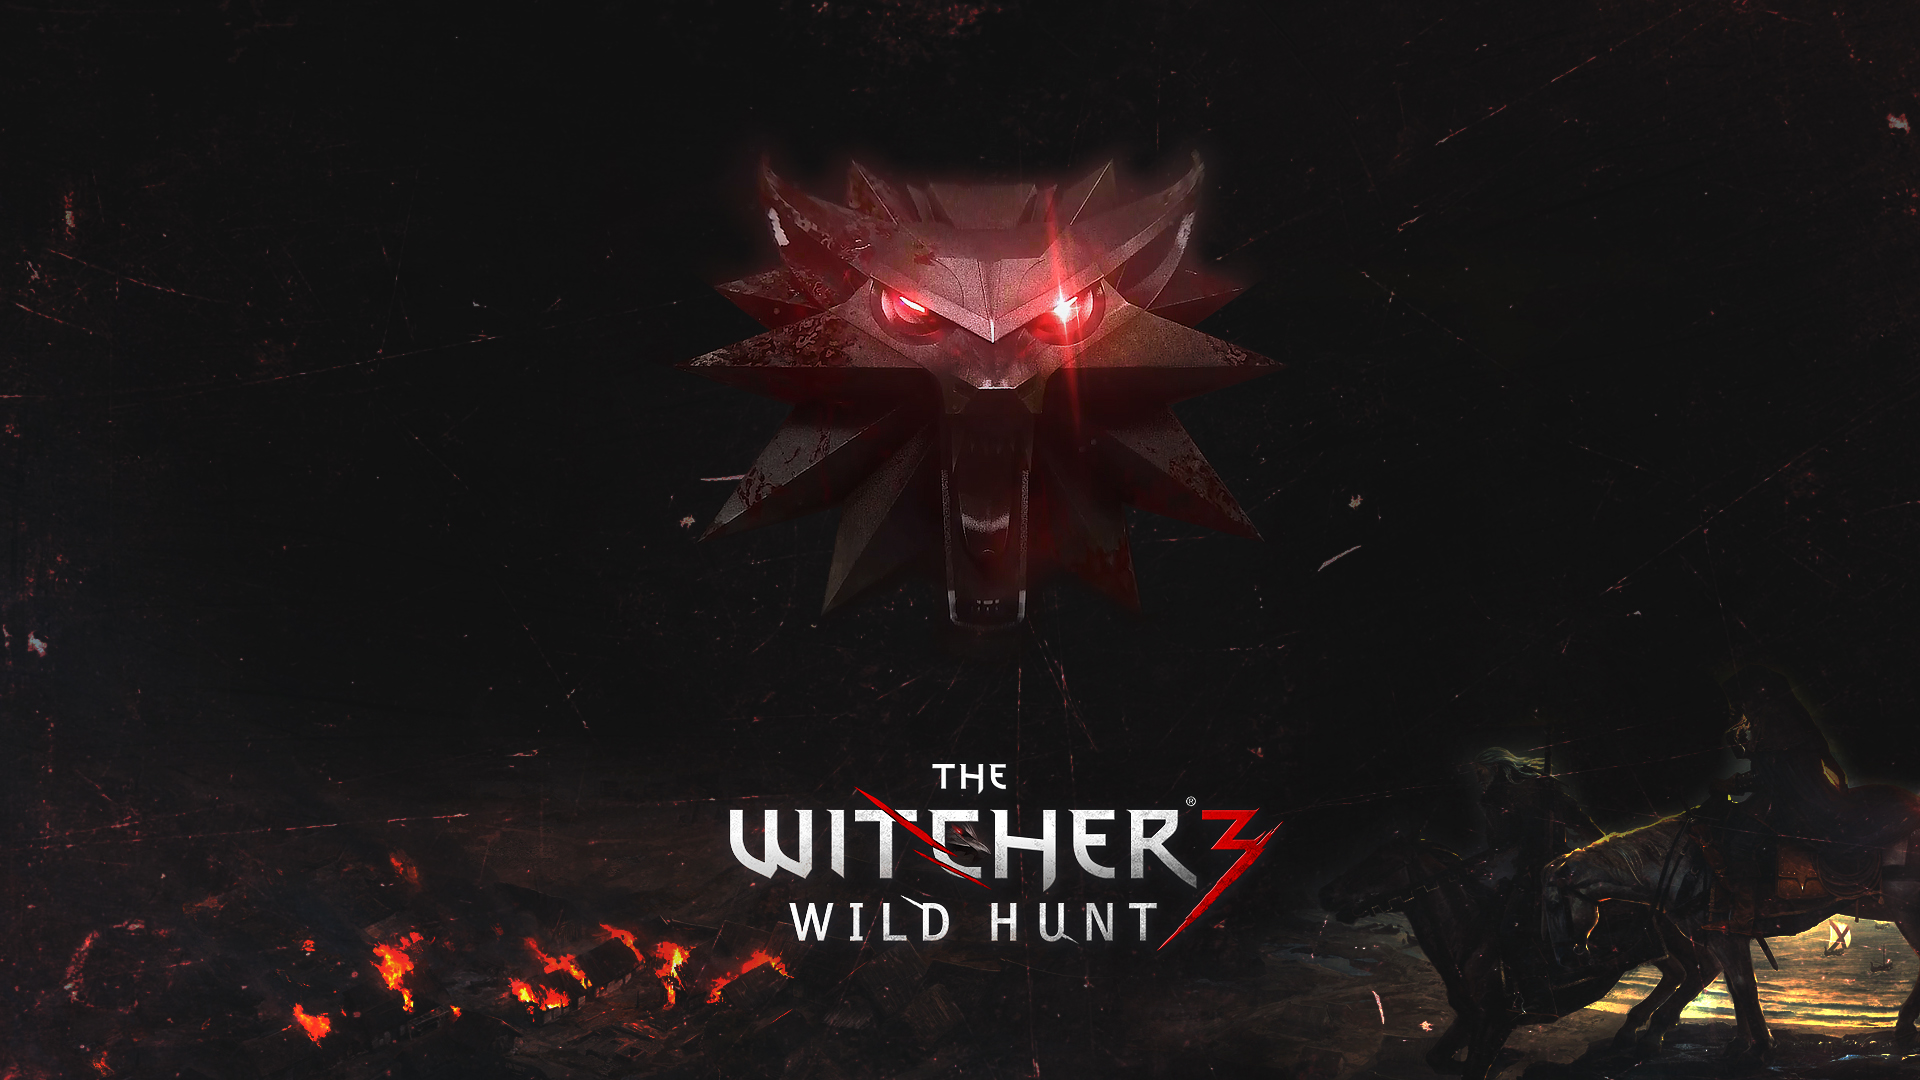 The Witcher 3 Wallpaper - Witcher 3 Medaillon - HD Wallpaper 